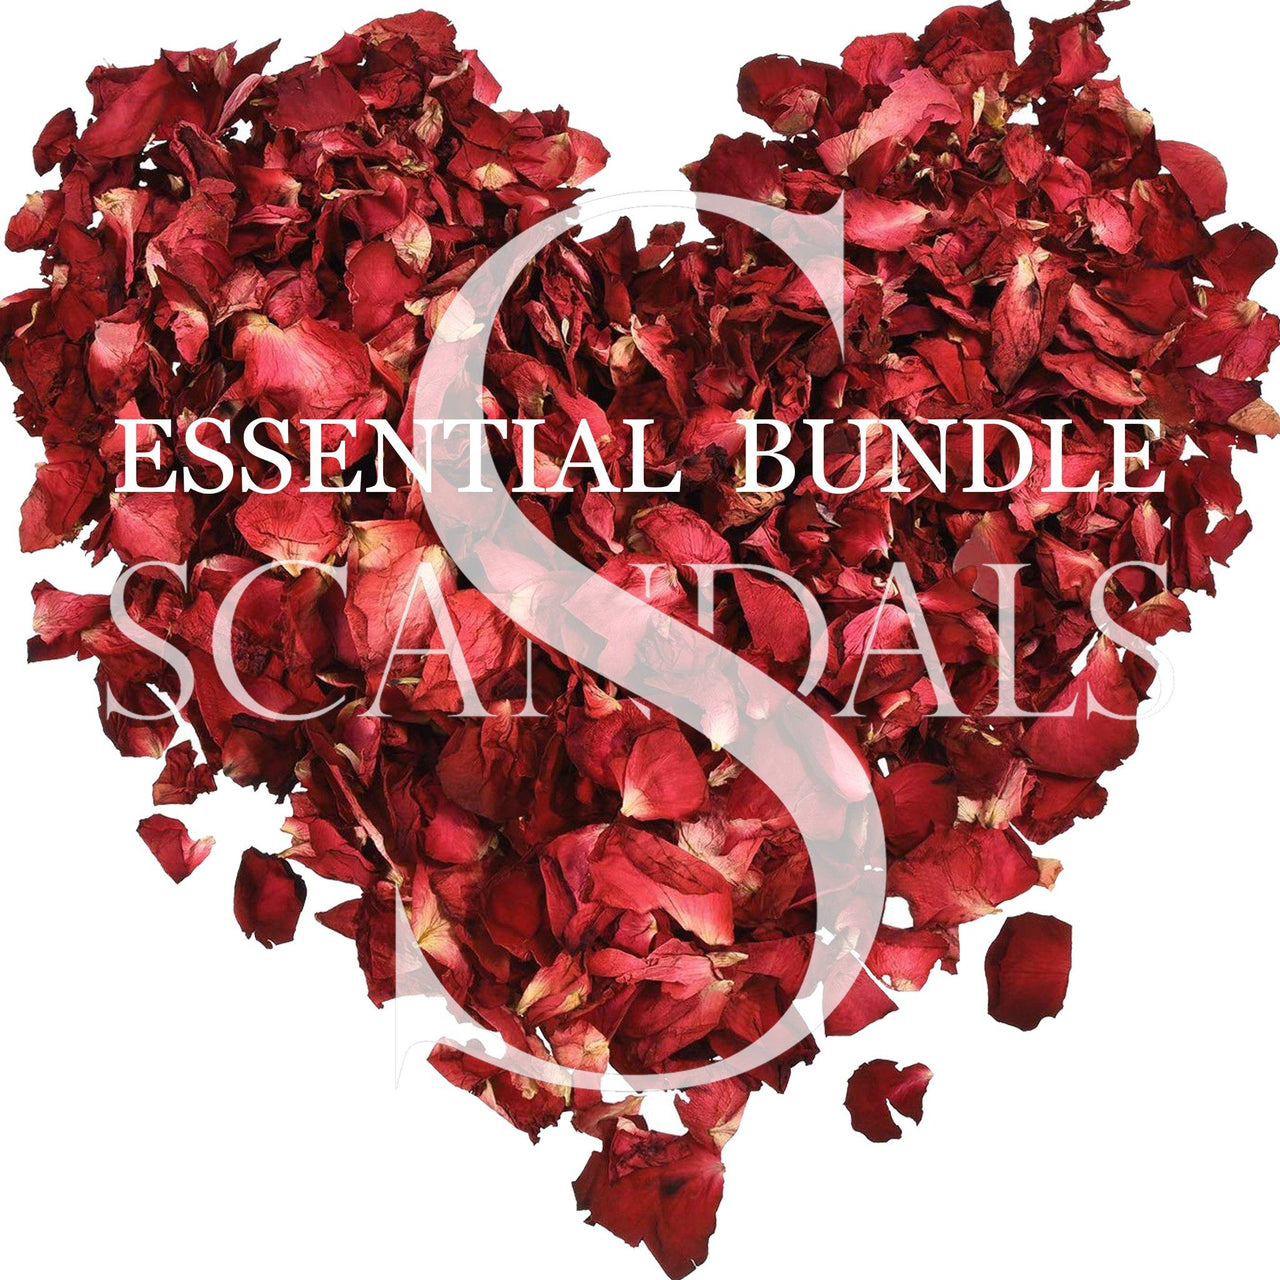 The Scandals Essential Bundle